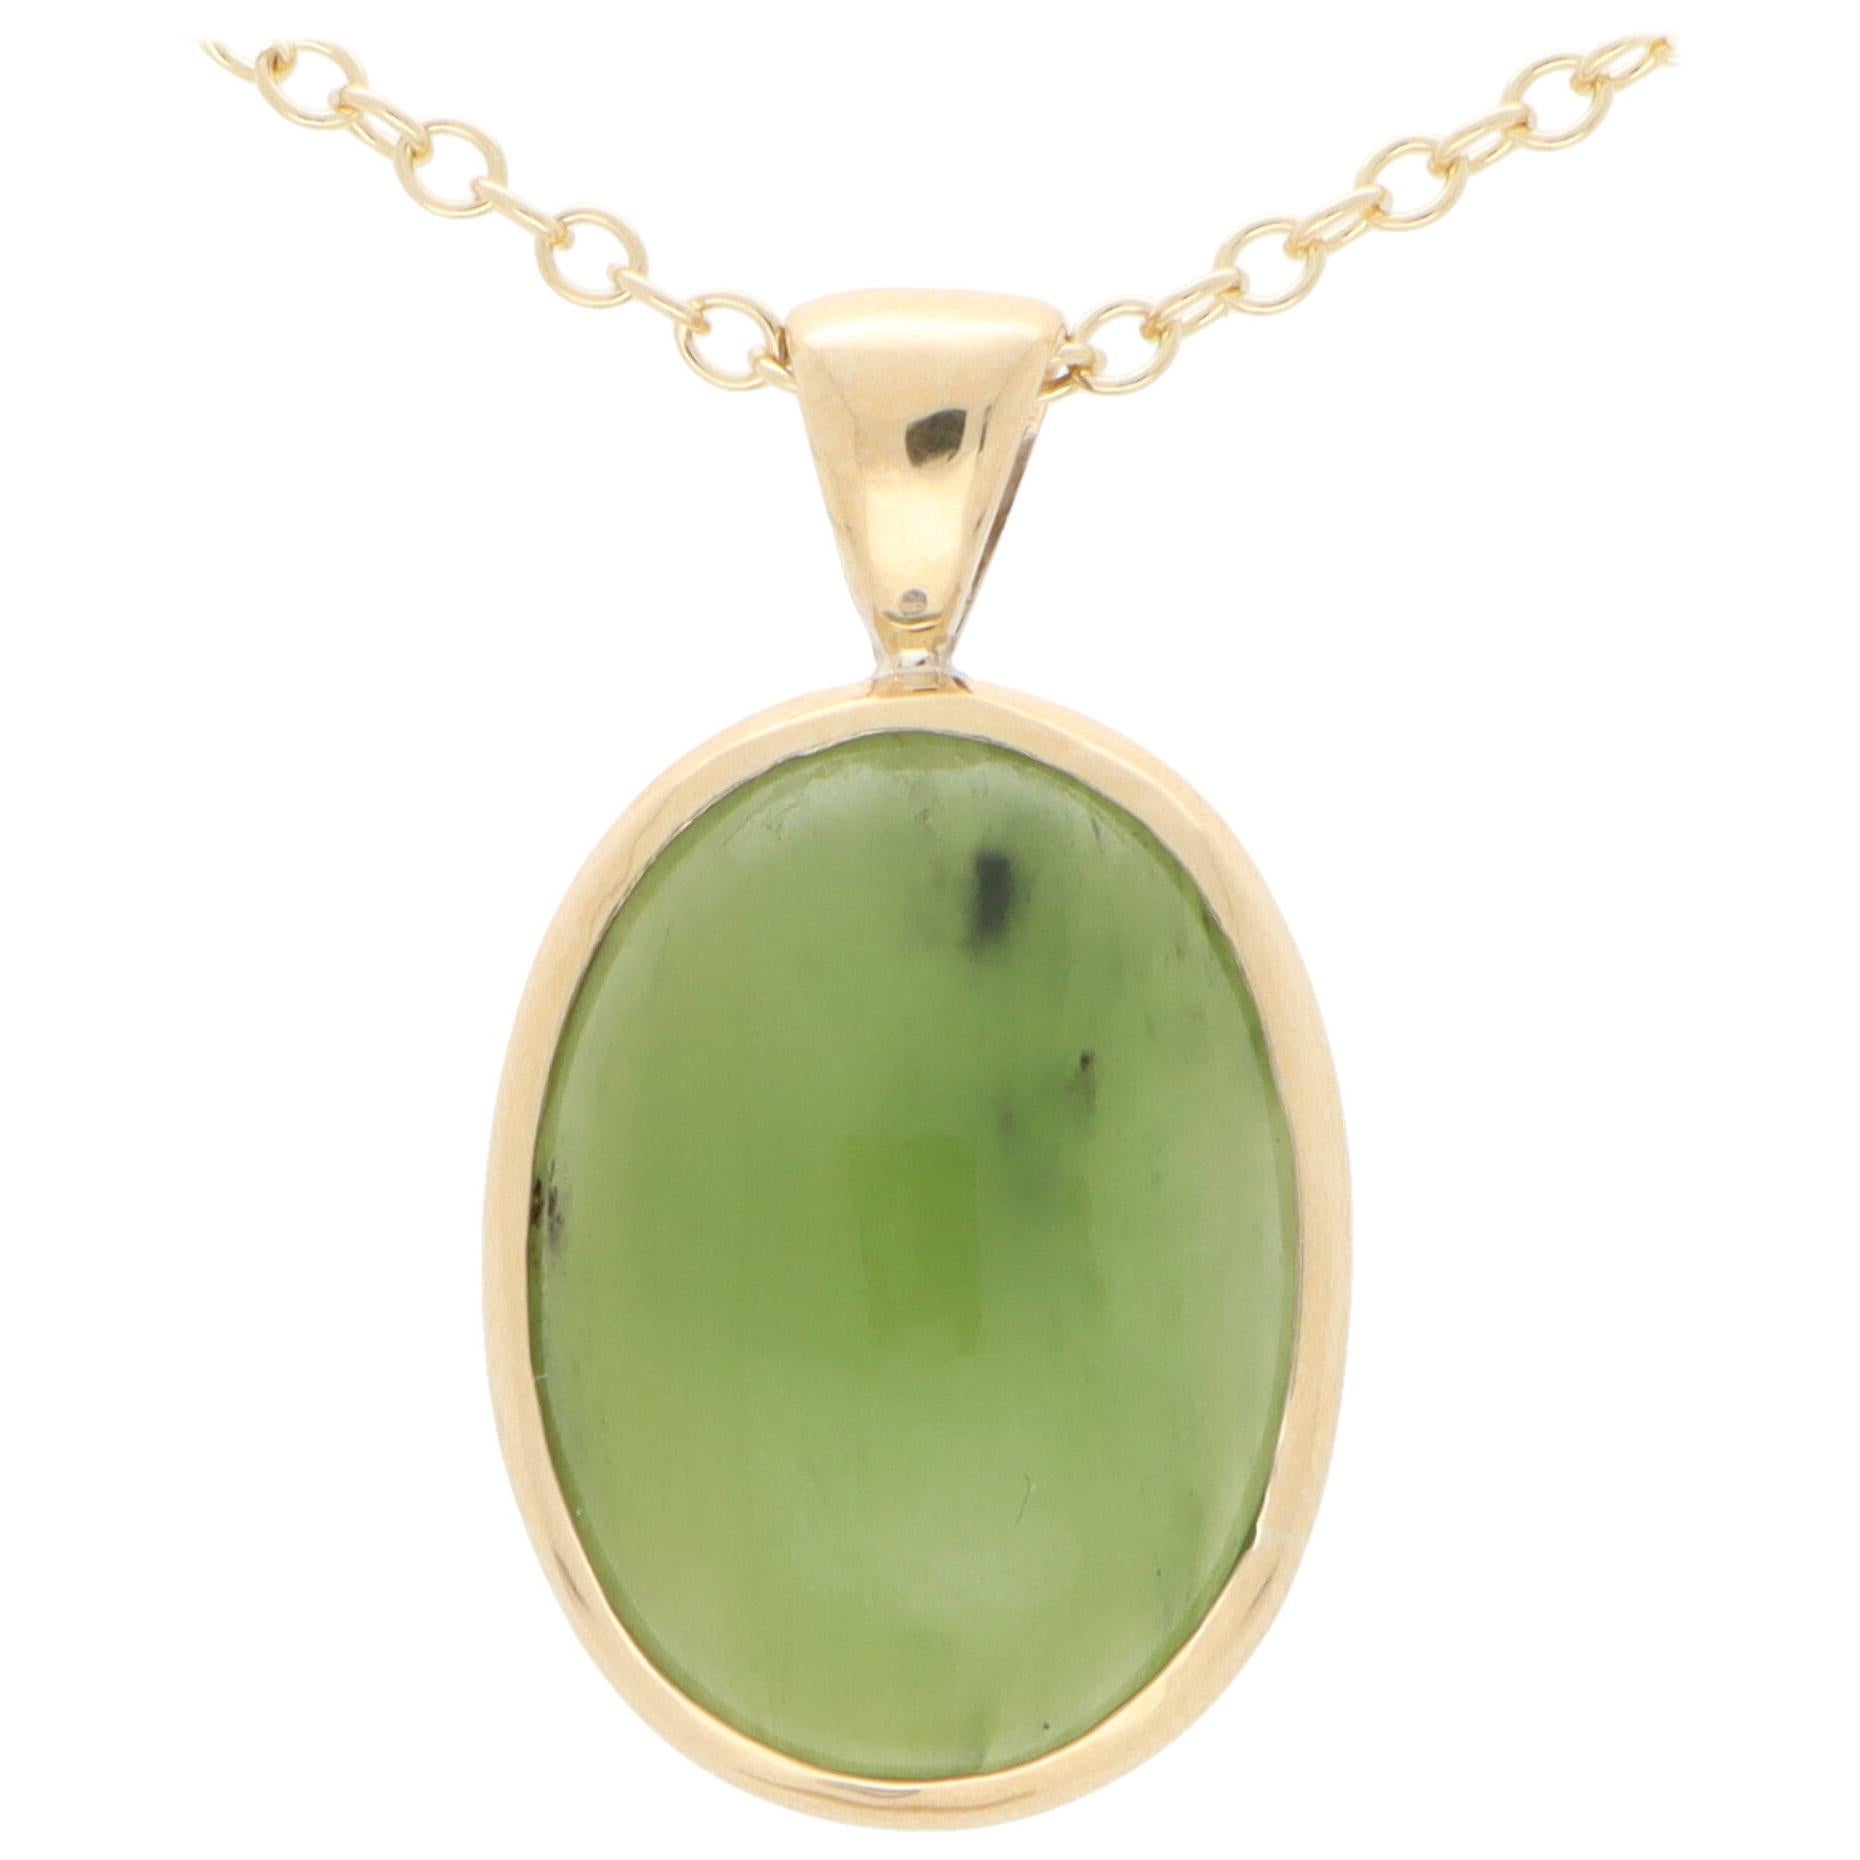 Oval Nephrite Pendant Necklace Set in 9k Yellow Gold